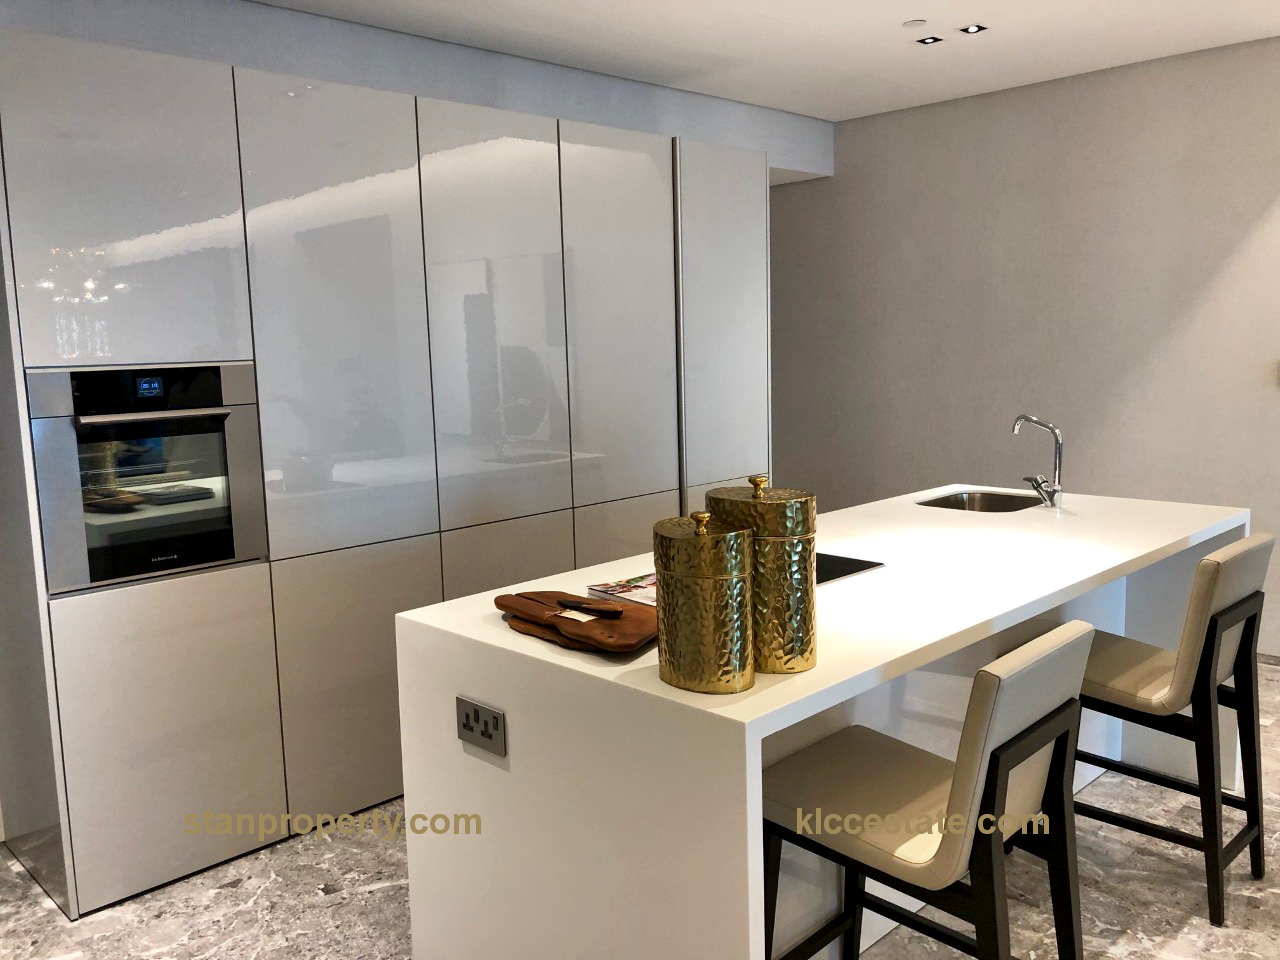 Four Seasons Condo Extensively Renovated